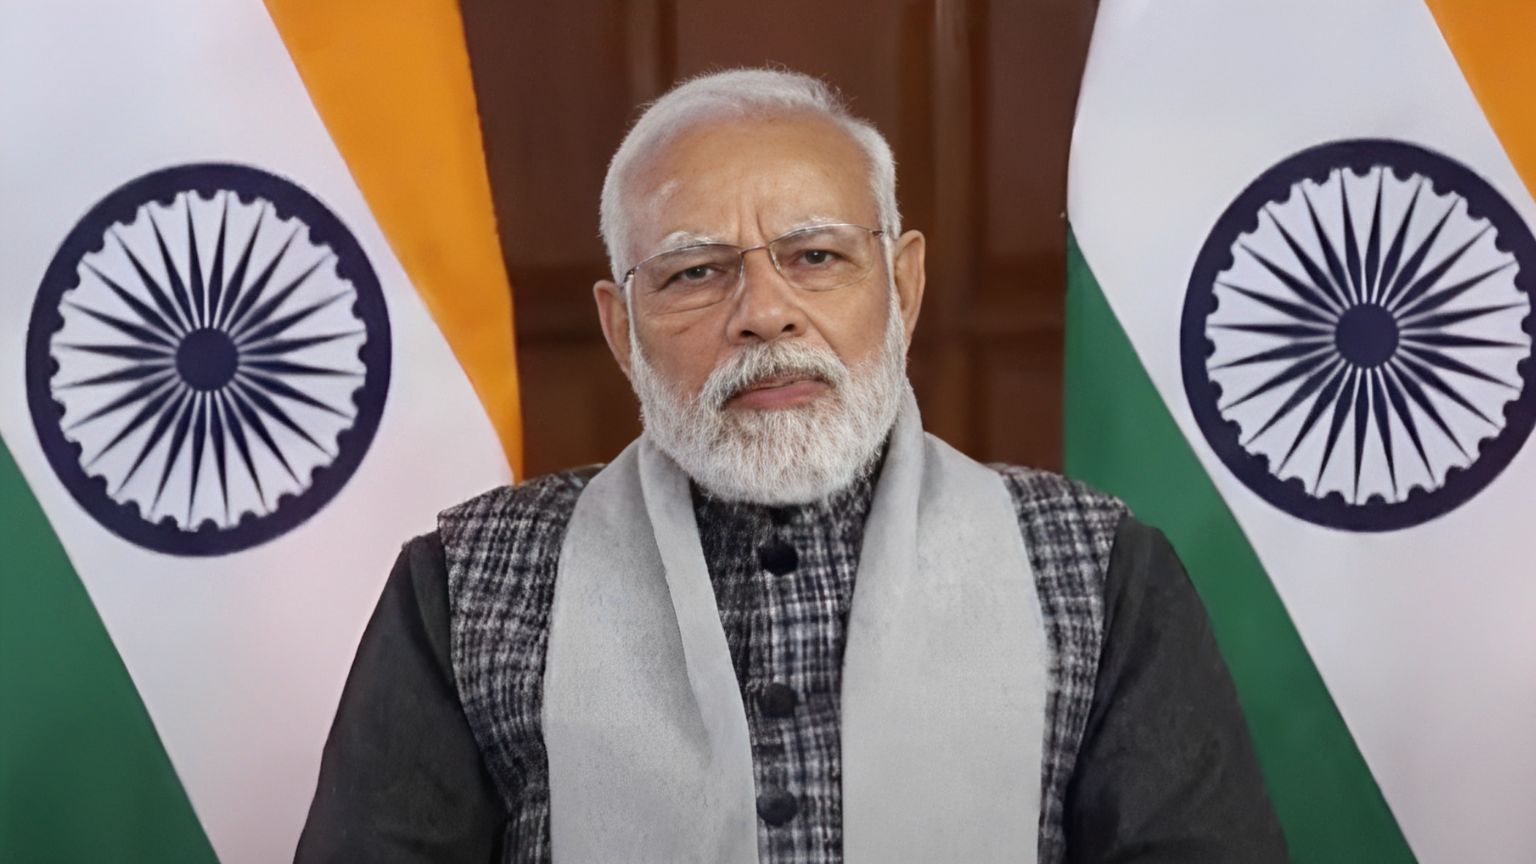 India blocks YouTube videos and tweets about BBC documentary that criticizes Prime Minister Modi